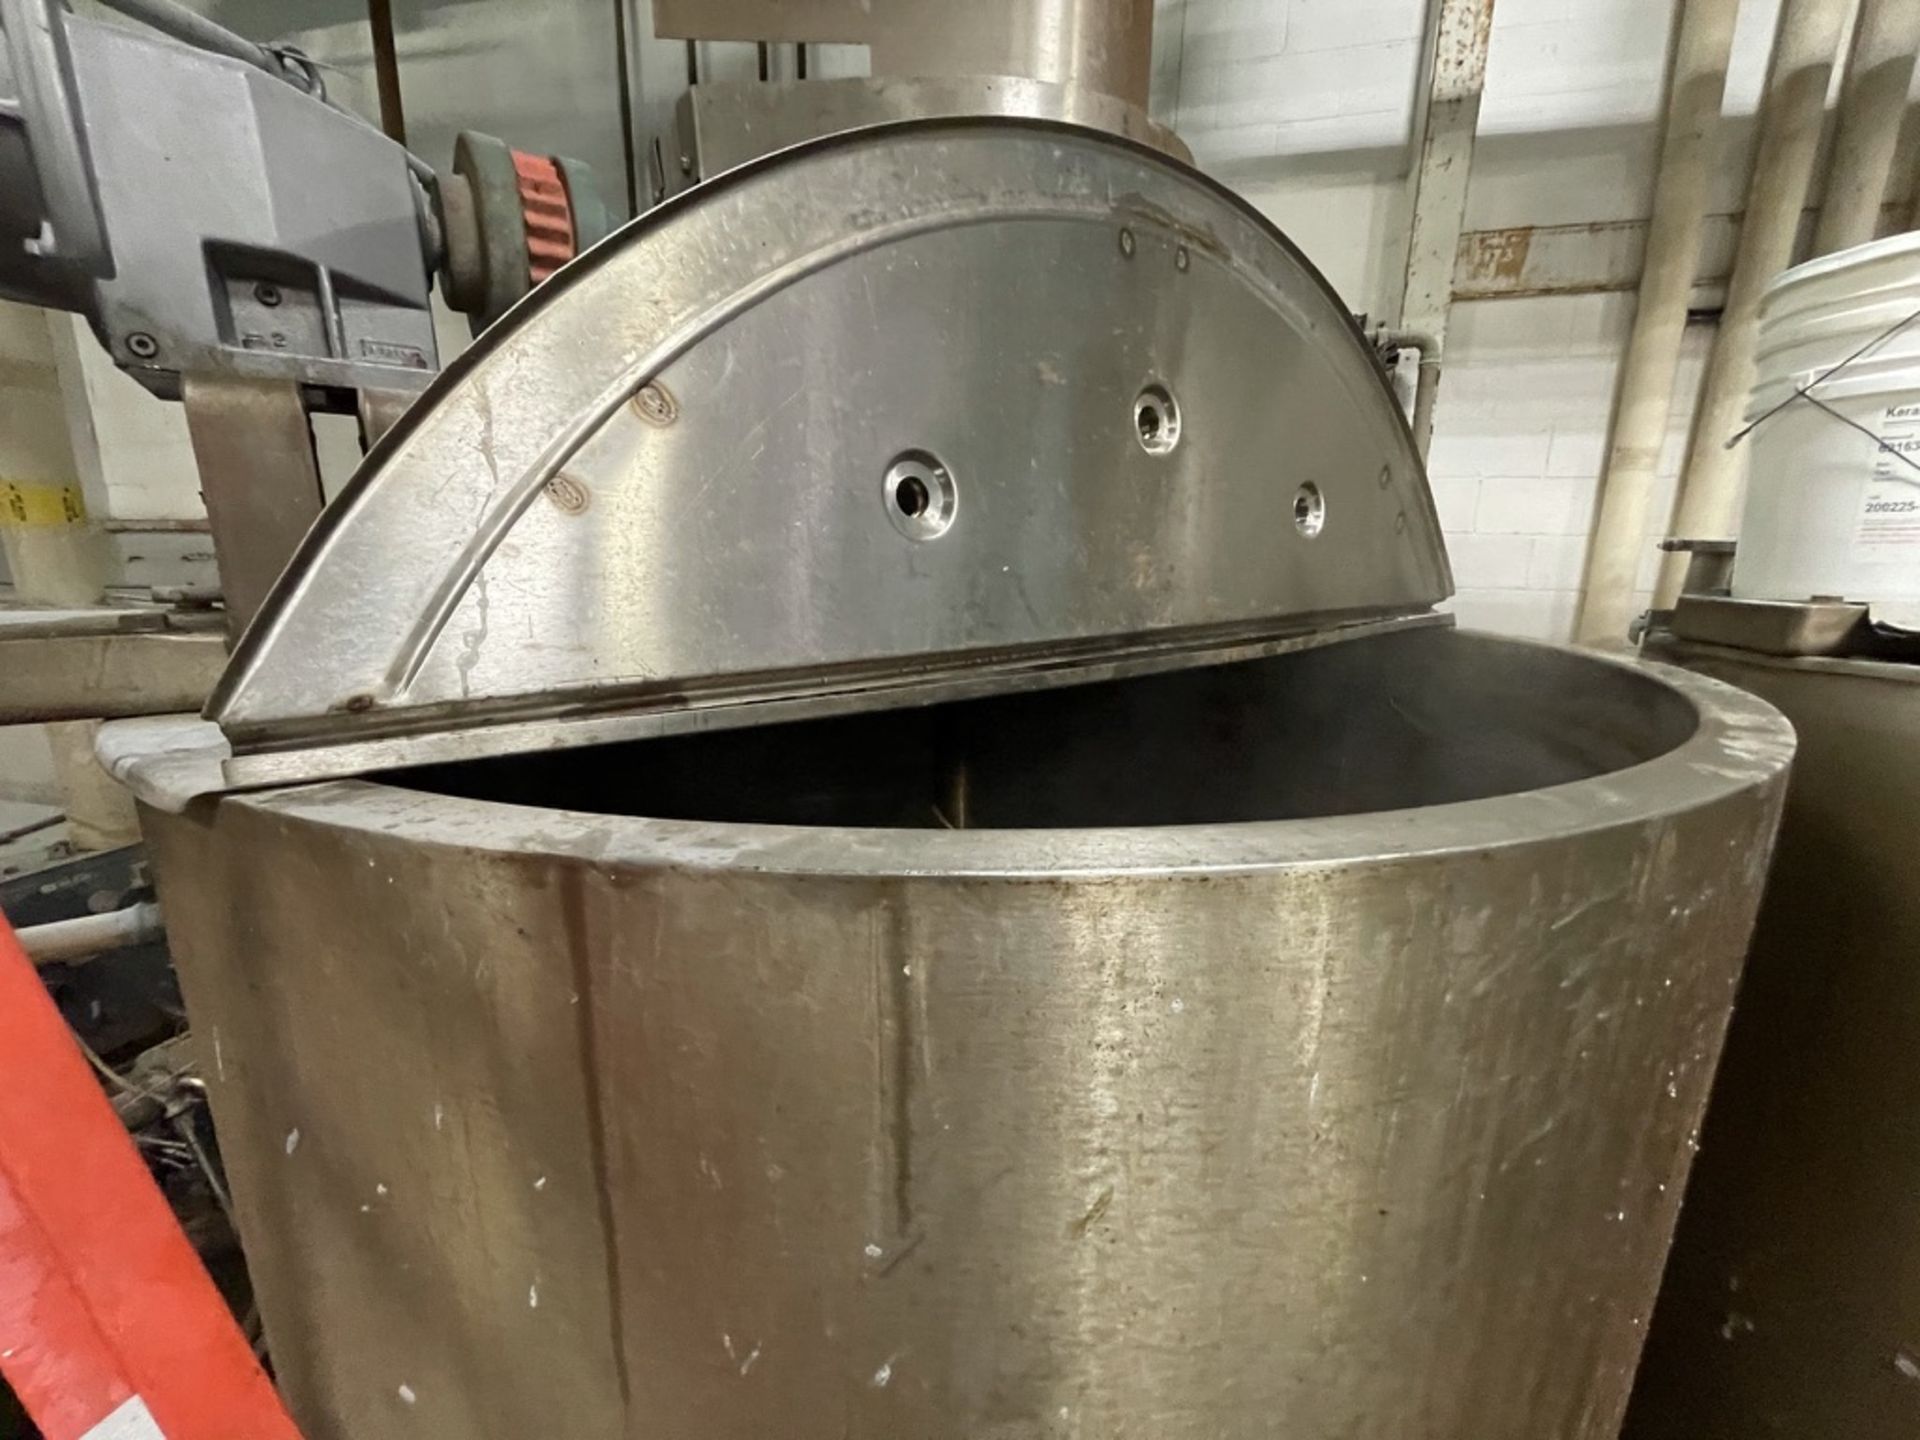 LEE 1,500 GALLON S/S FULLY-JACKETED KETTLE WITH TOP-MOUNT DUAL-MOTION AGITATION - Image 18 of 18